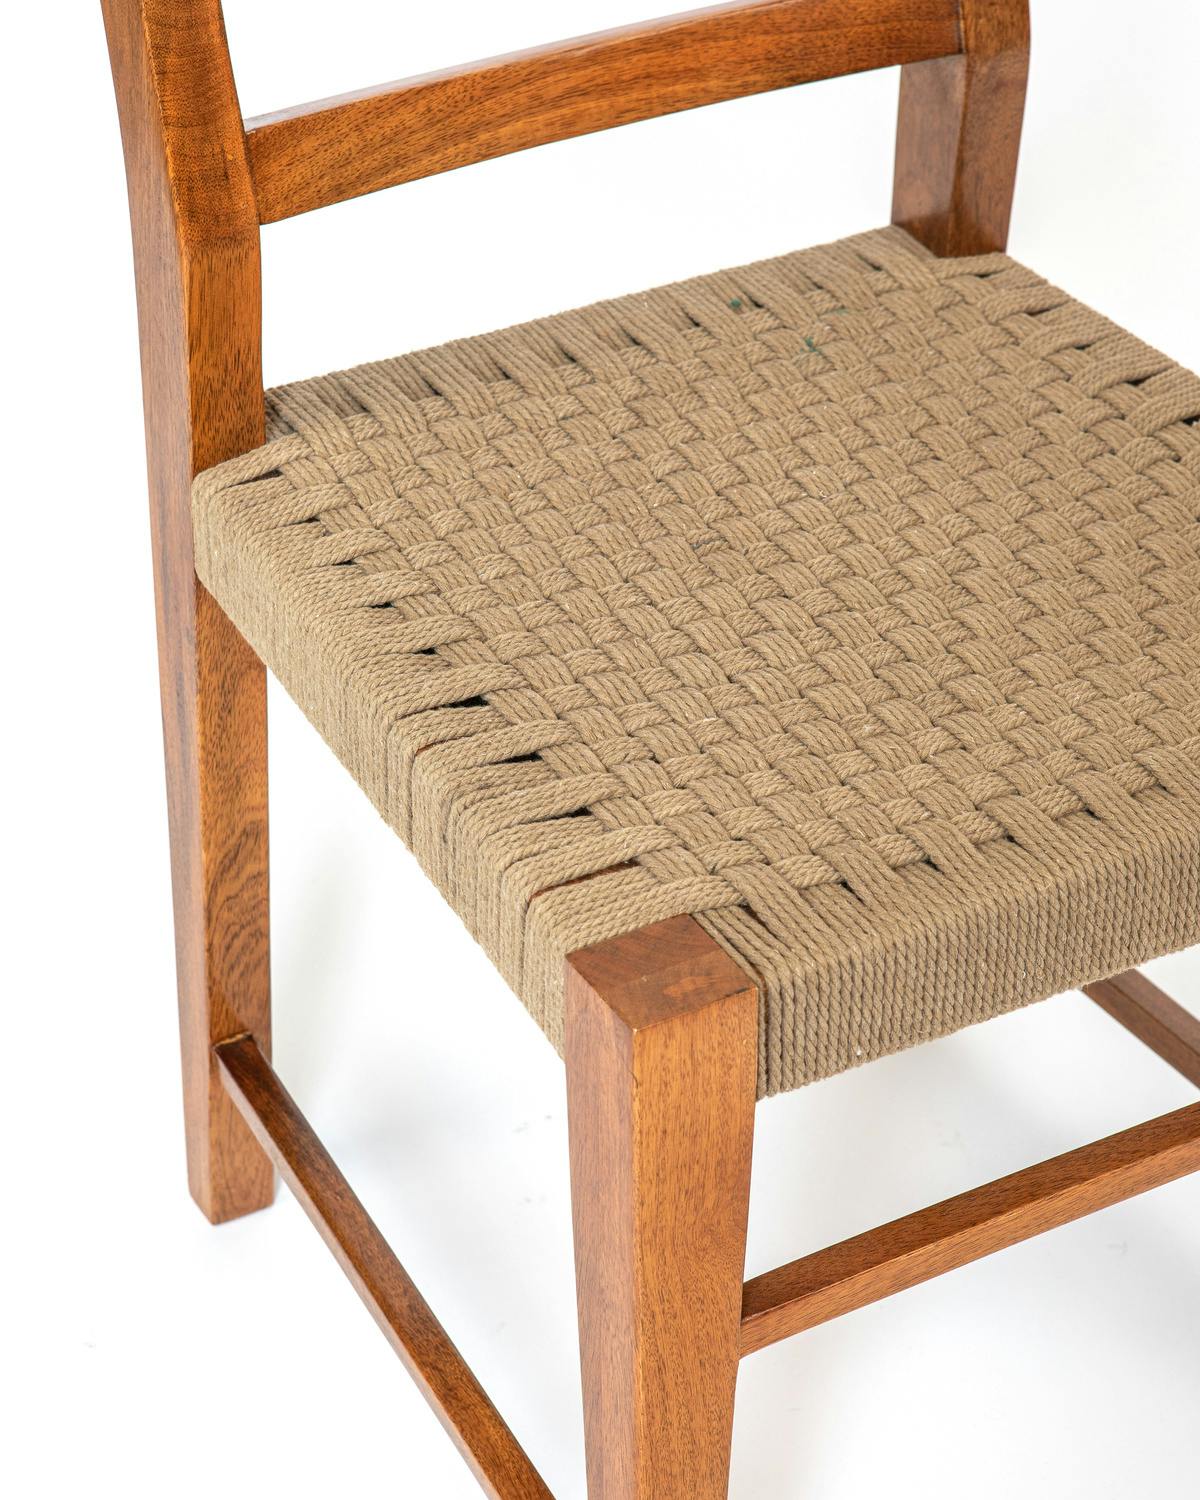 Chair With Rattan Seat (In store exclusive), Honey. Image #3